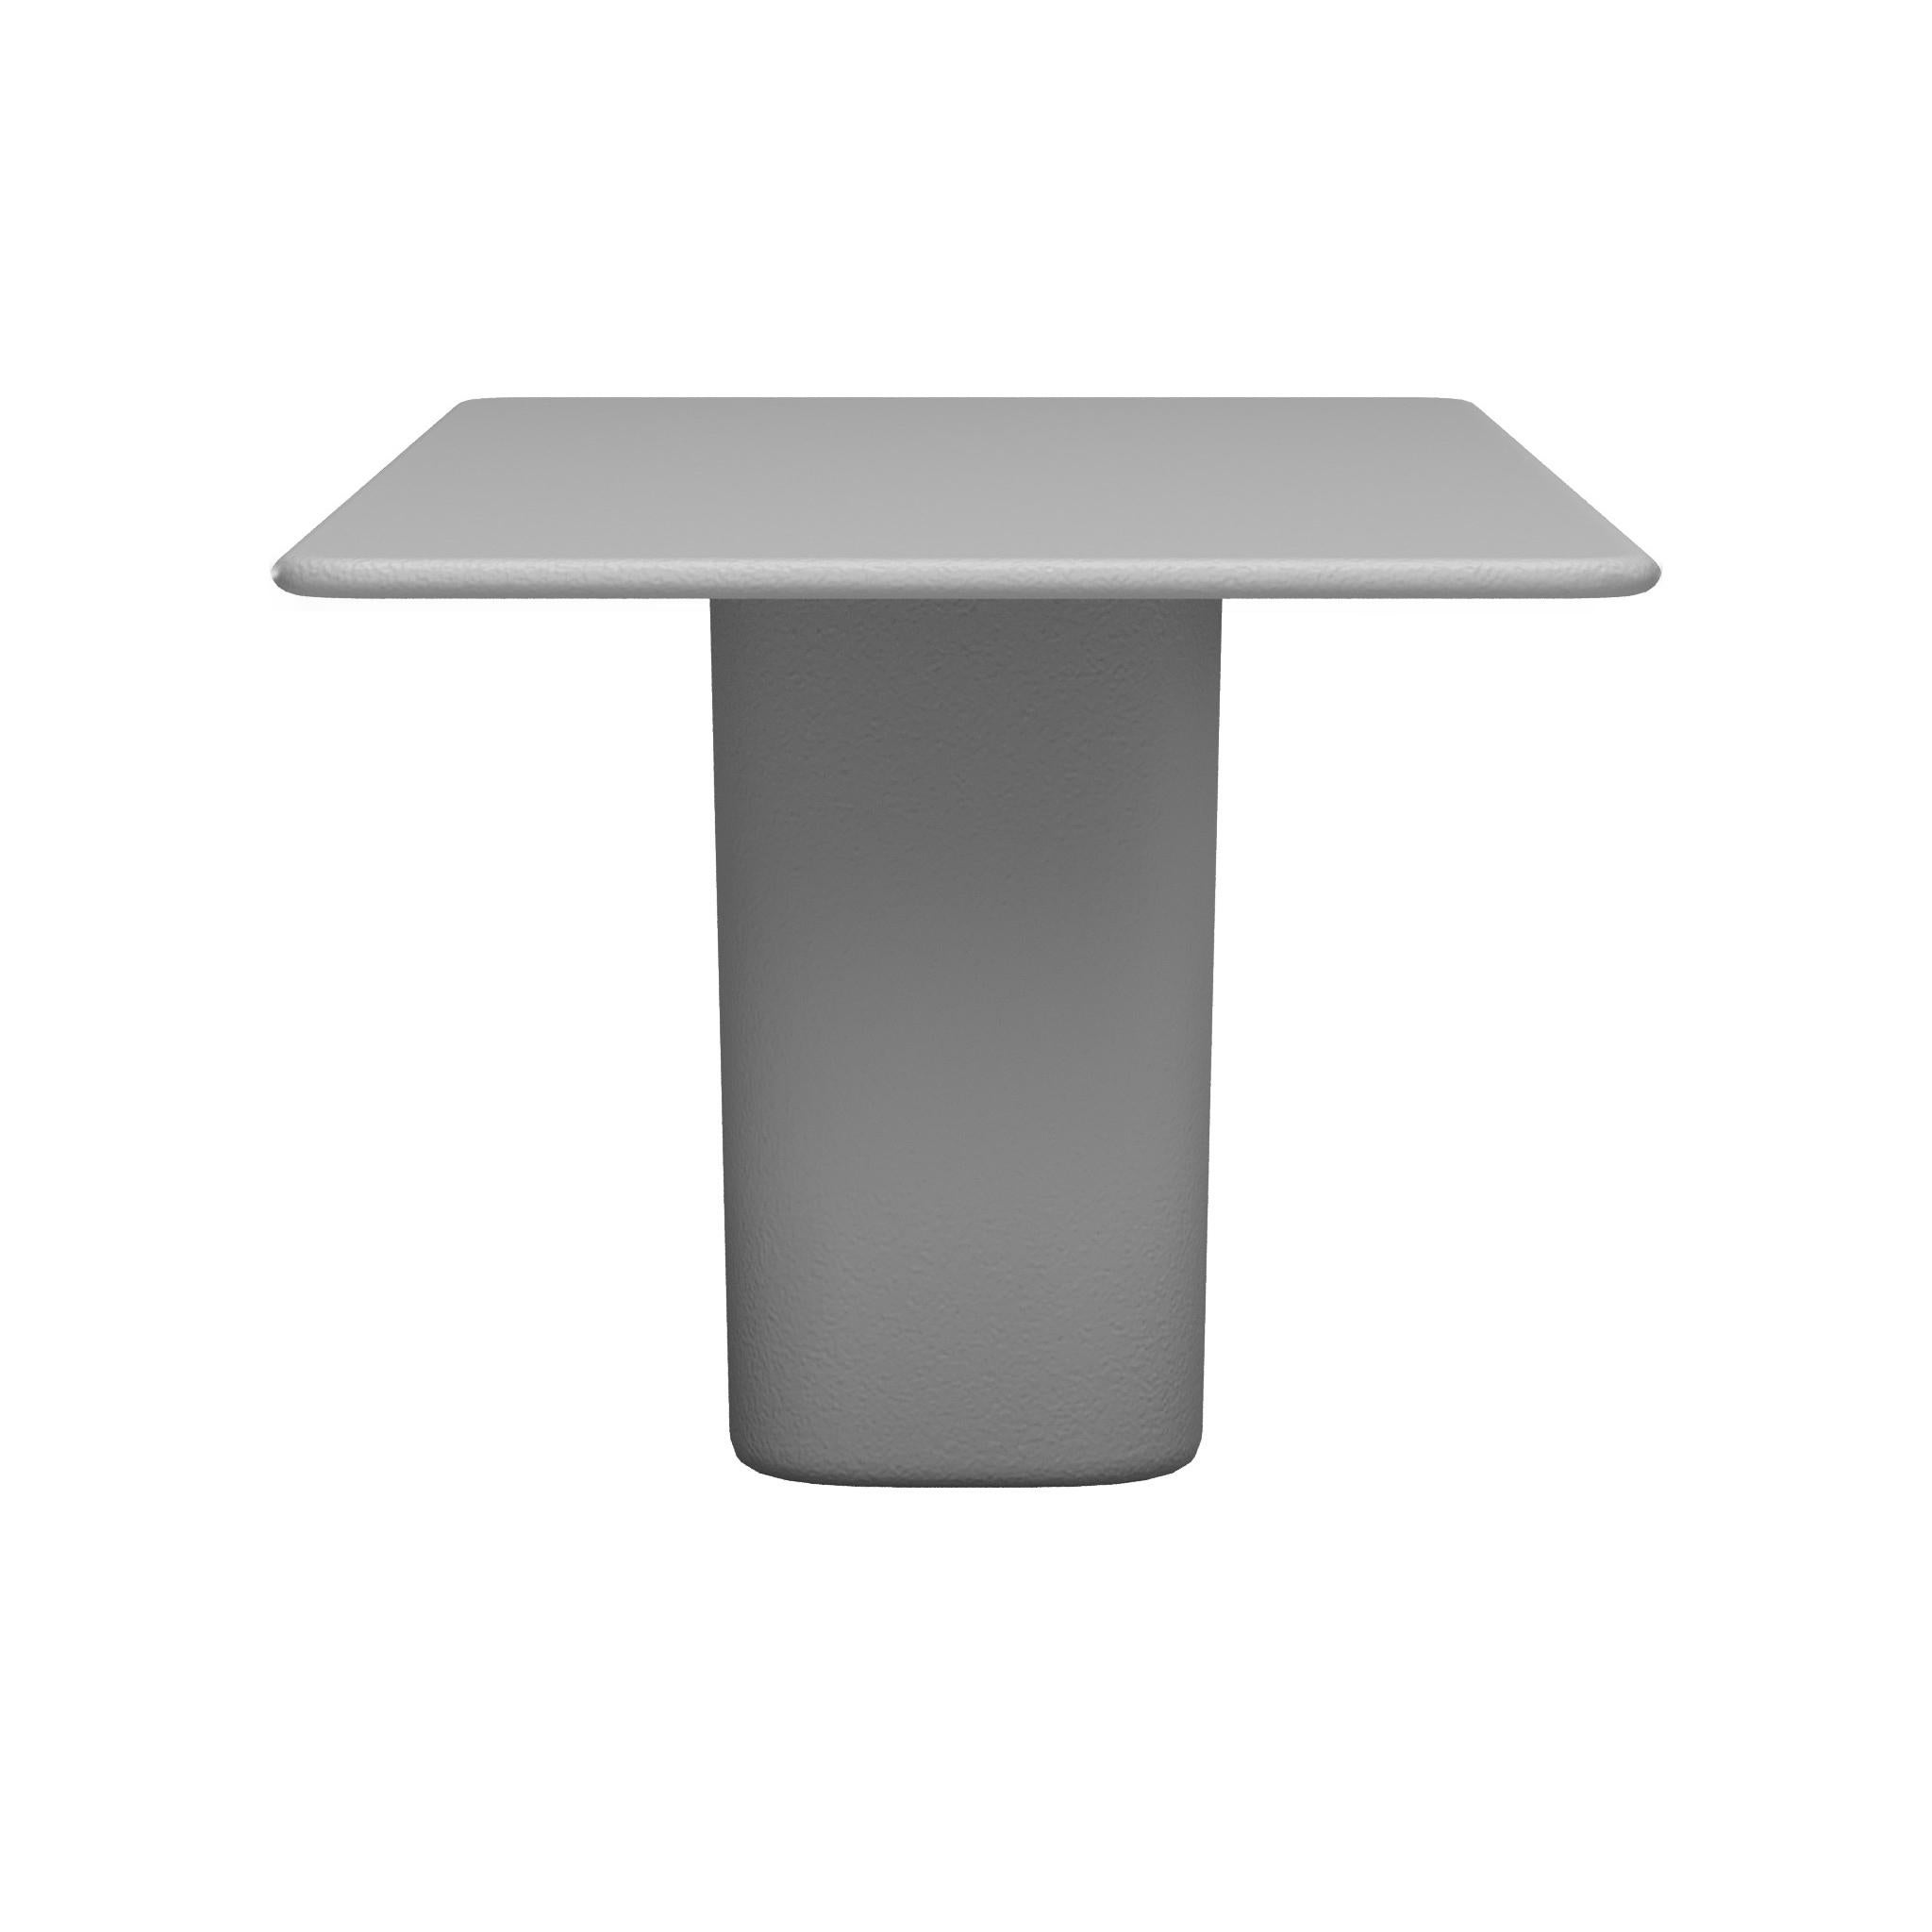 Contemporary Outdoor Dining Table, Raw Fiberglass In New Condition For Sale In New York, NY